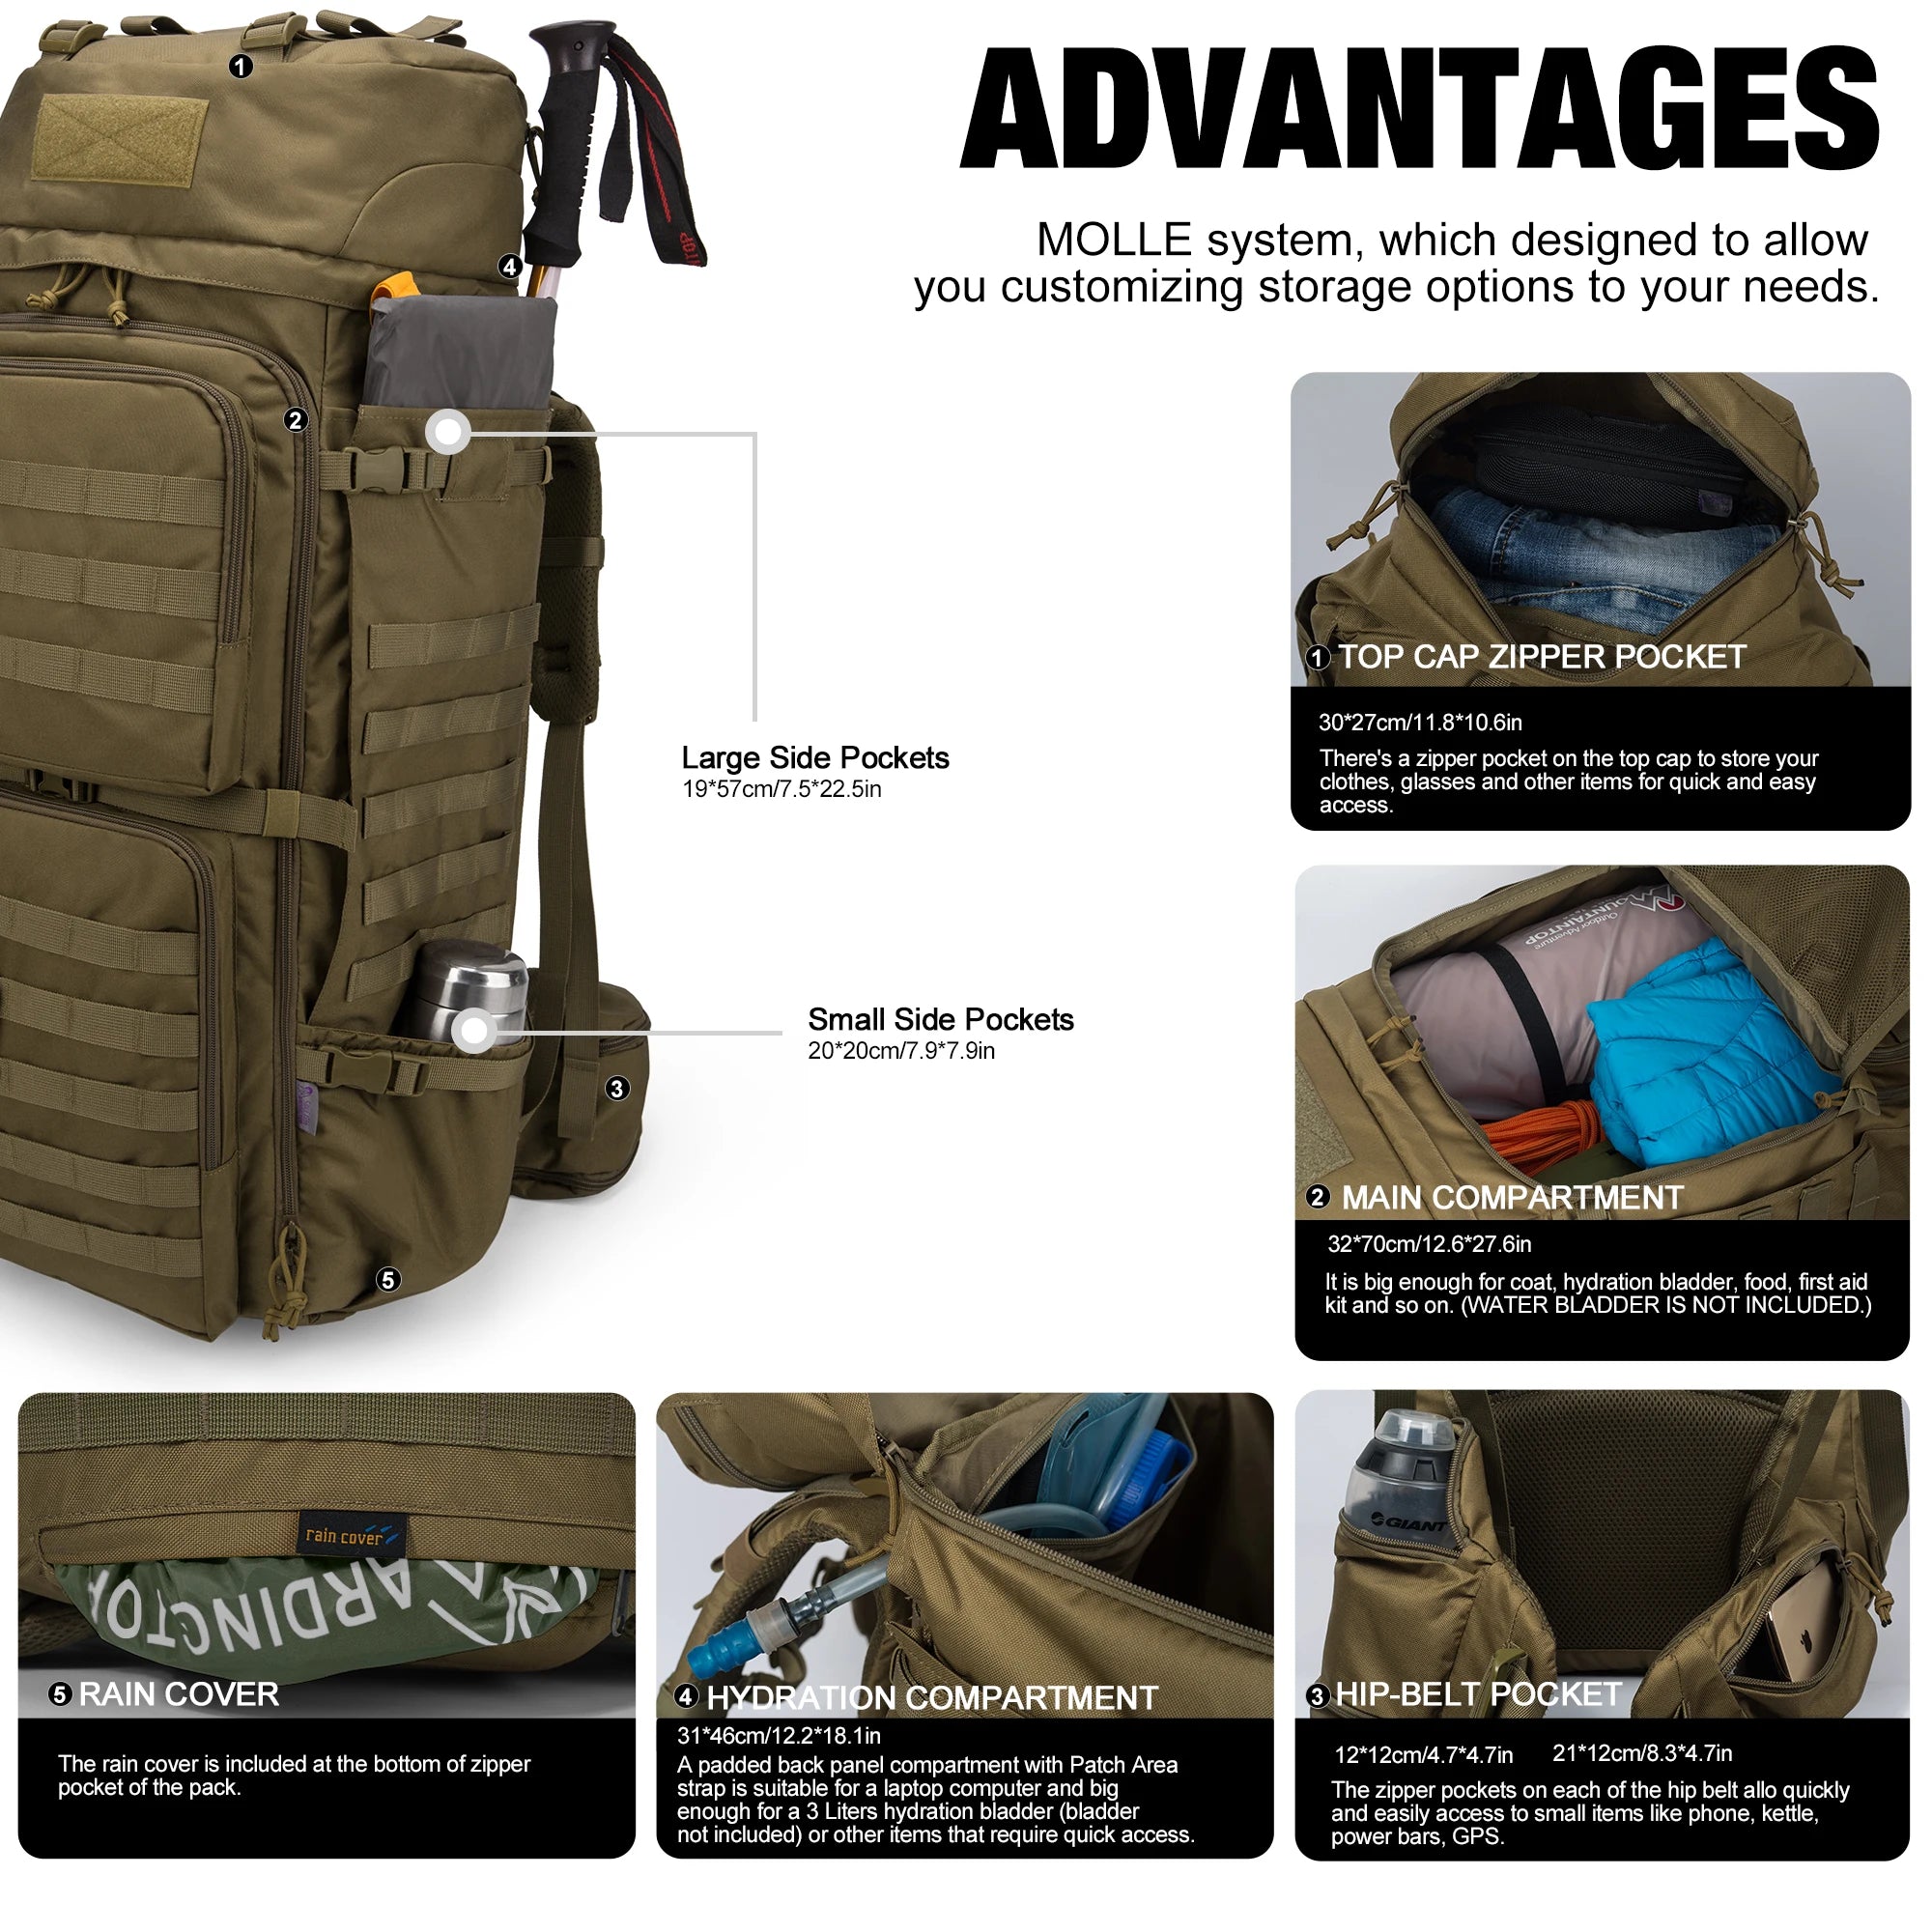 Expedition Pro 75L: Tactical Backpack with Internal Frame for Military